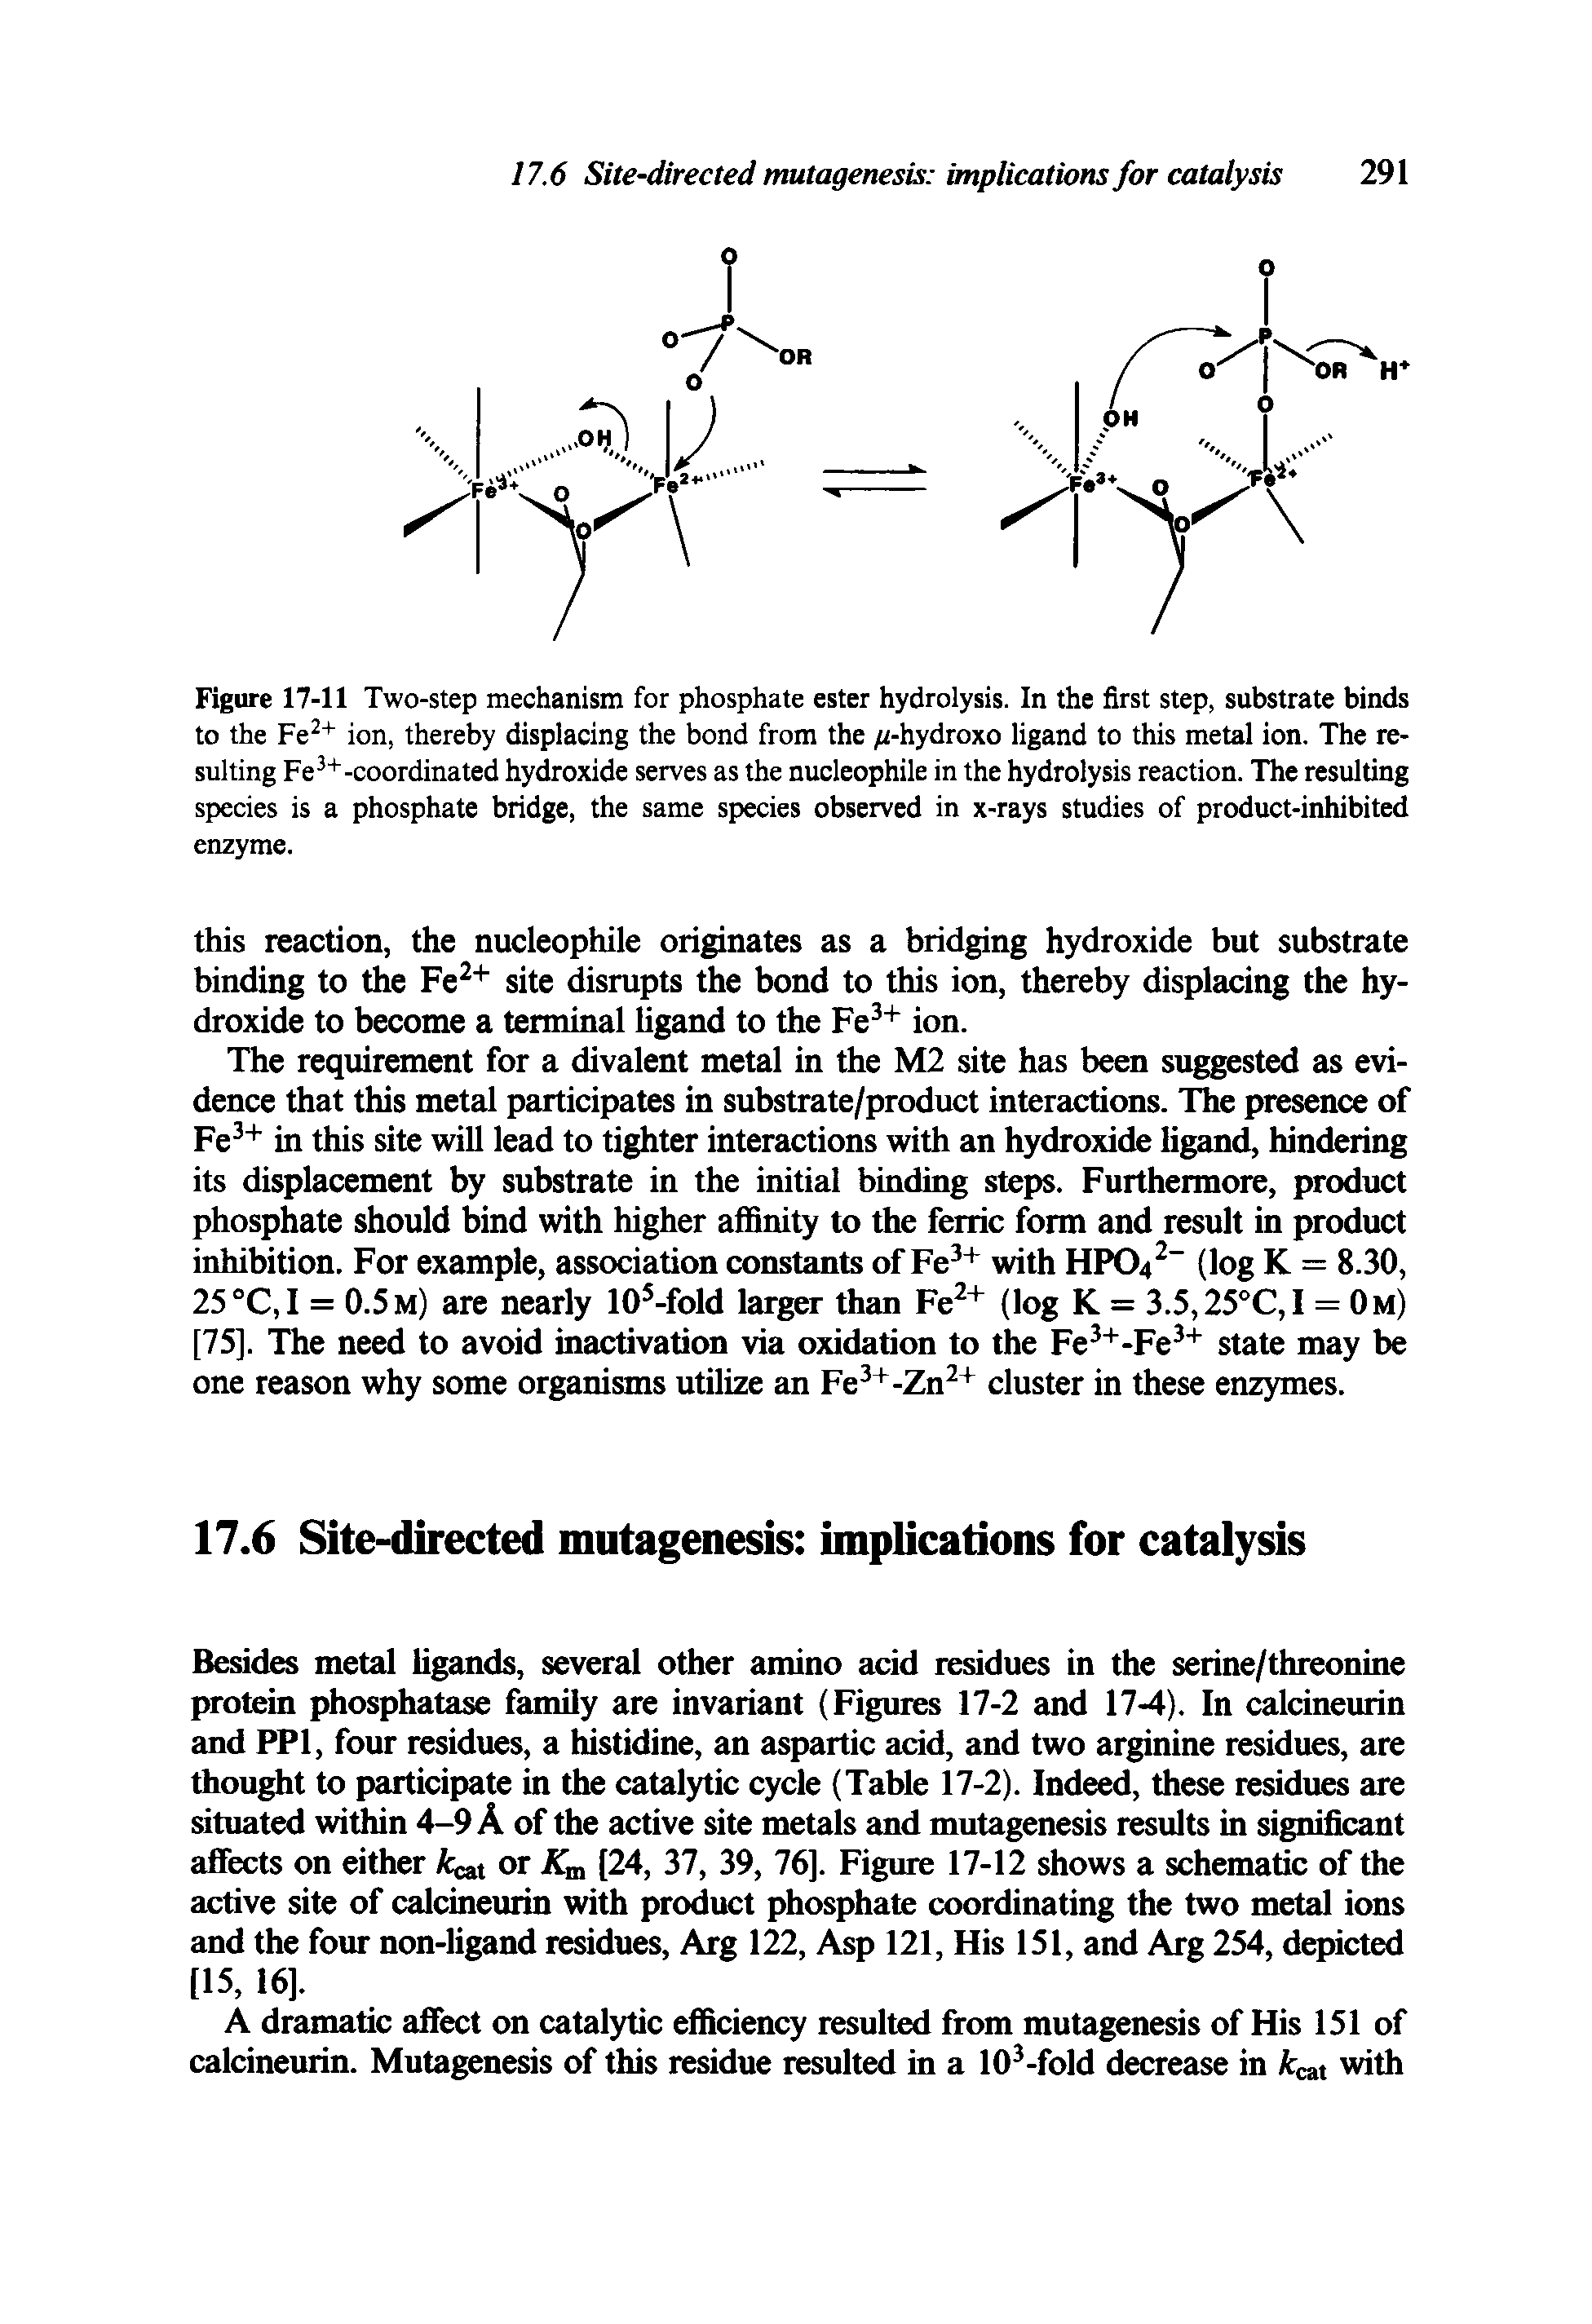 Figure 17-11 Two-step mechanism for phosphate ester hydrolysis. In the first step, substrate binds to the Fe ion, thereby displacing the bond from the -hydroxo ligand to this metal ion. The resulting Fe -coordinated hydroxide serves as the nucleophile in the hydrolysis reaction. The resulting species is a phosphate bridge, the same species observed in x-rays studies of product-inhibited enzyme.